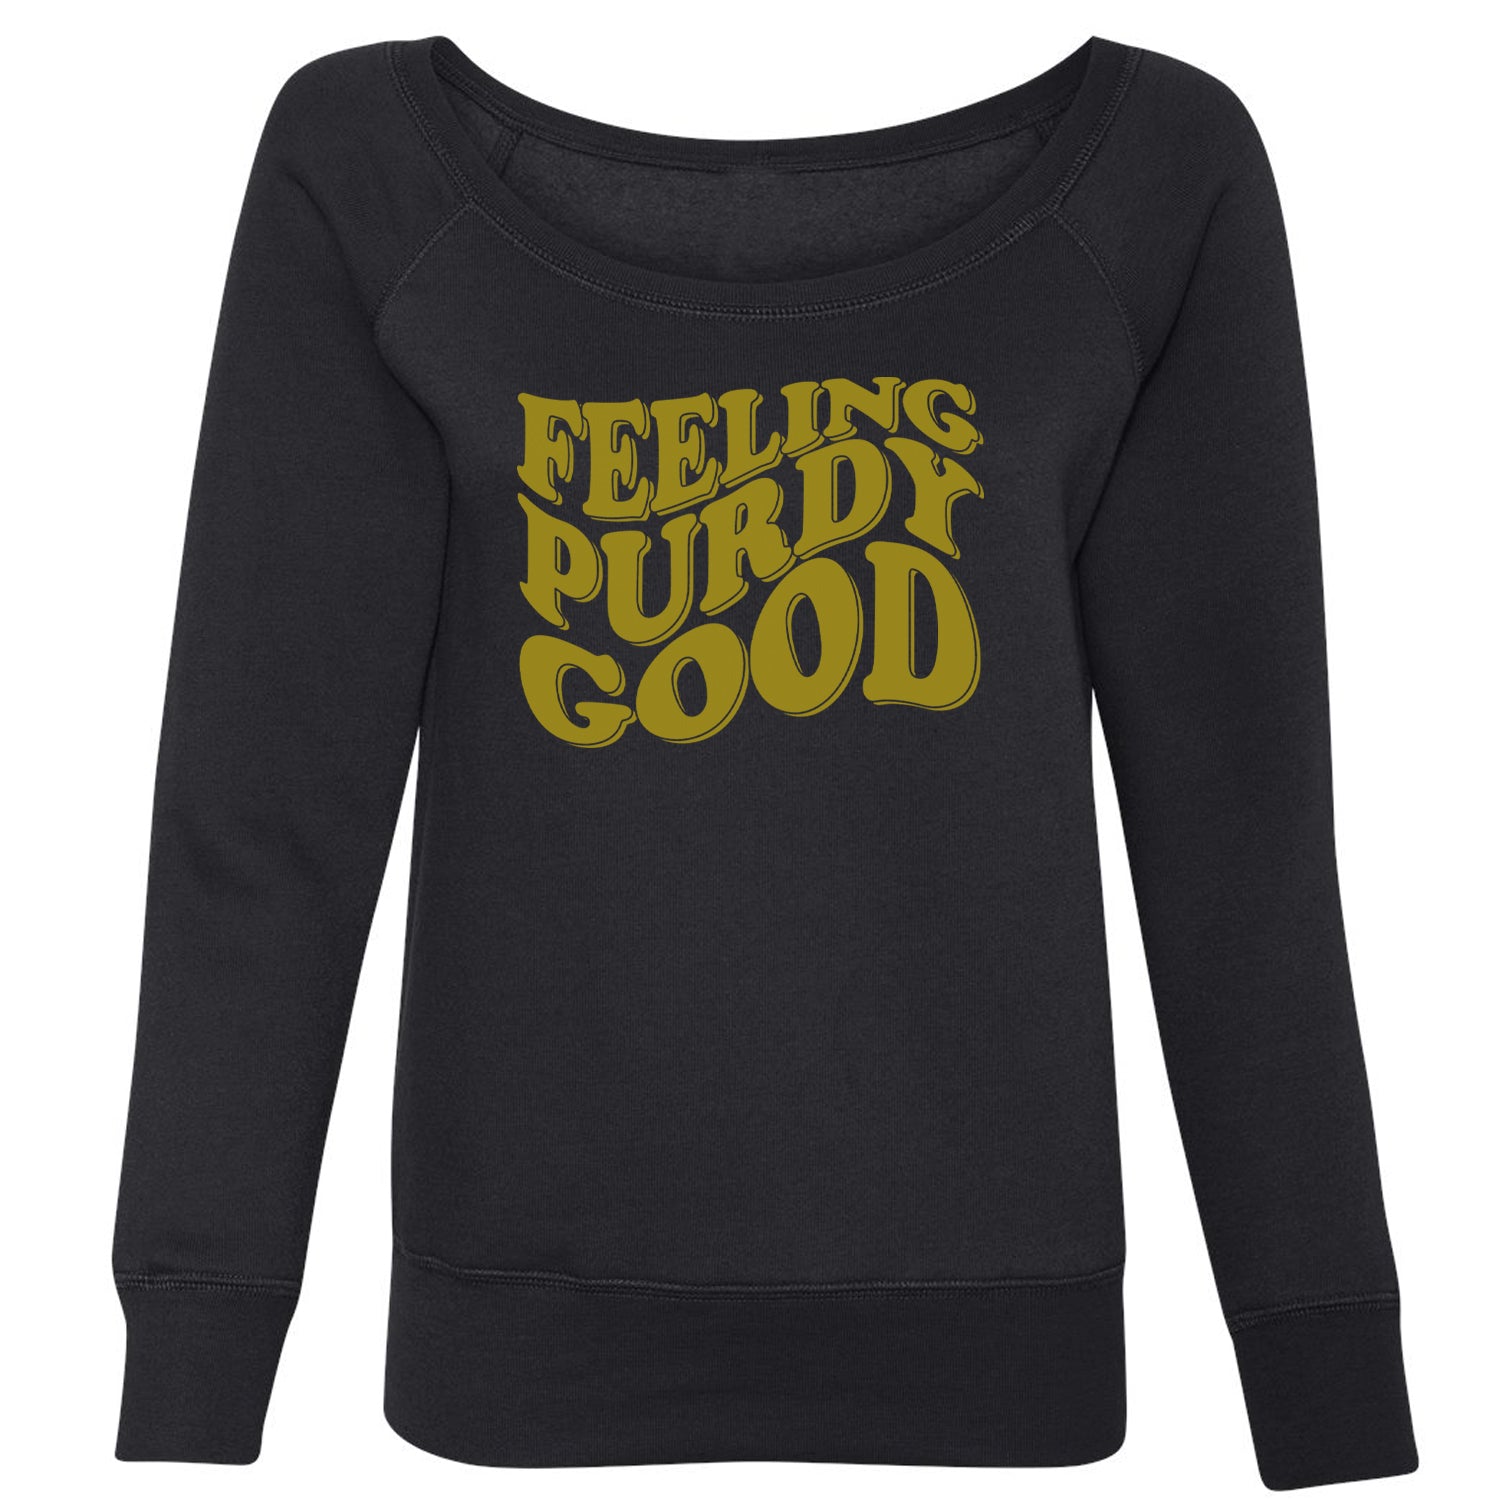 Feeling Purdy Good Slouchy Off Shoulder Oversized Sweatshirt 13, football by Expression Tees